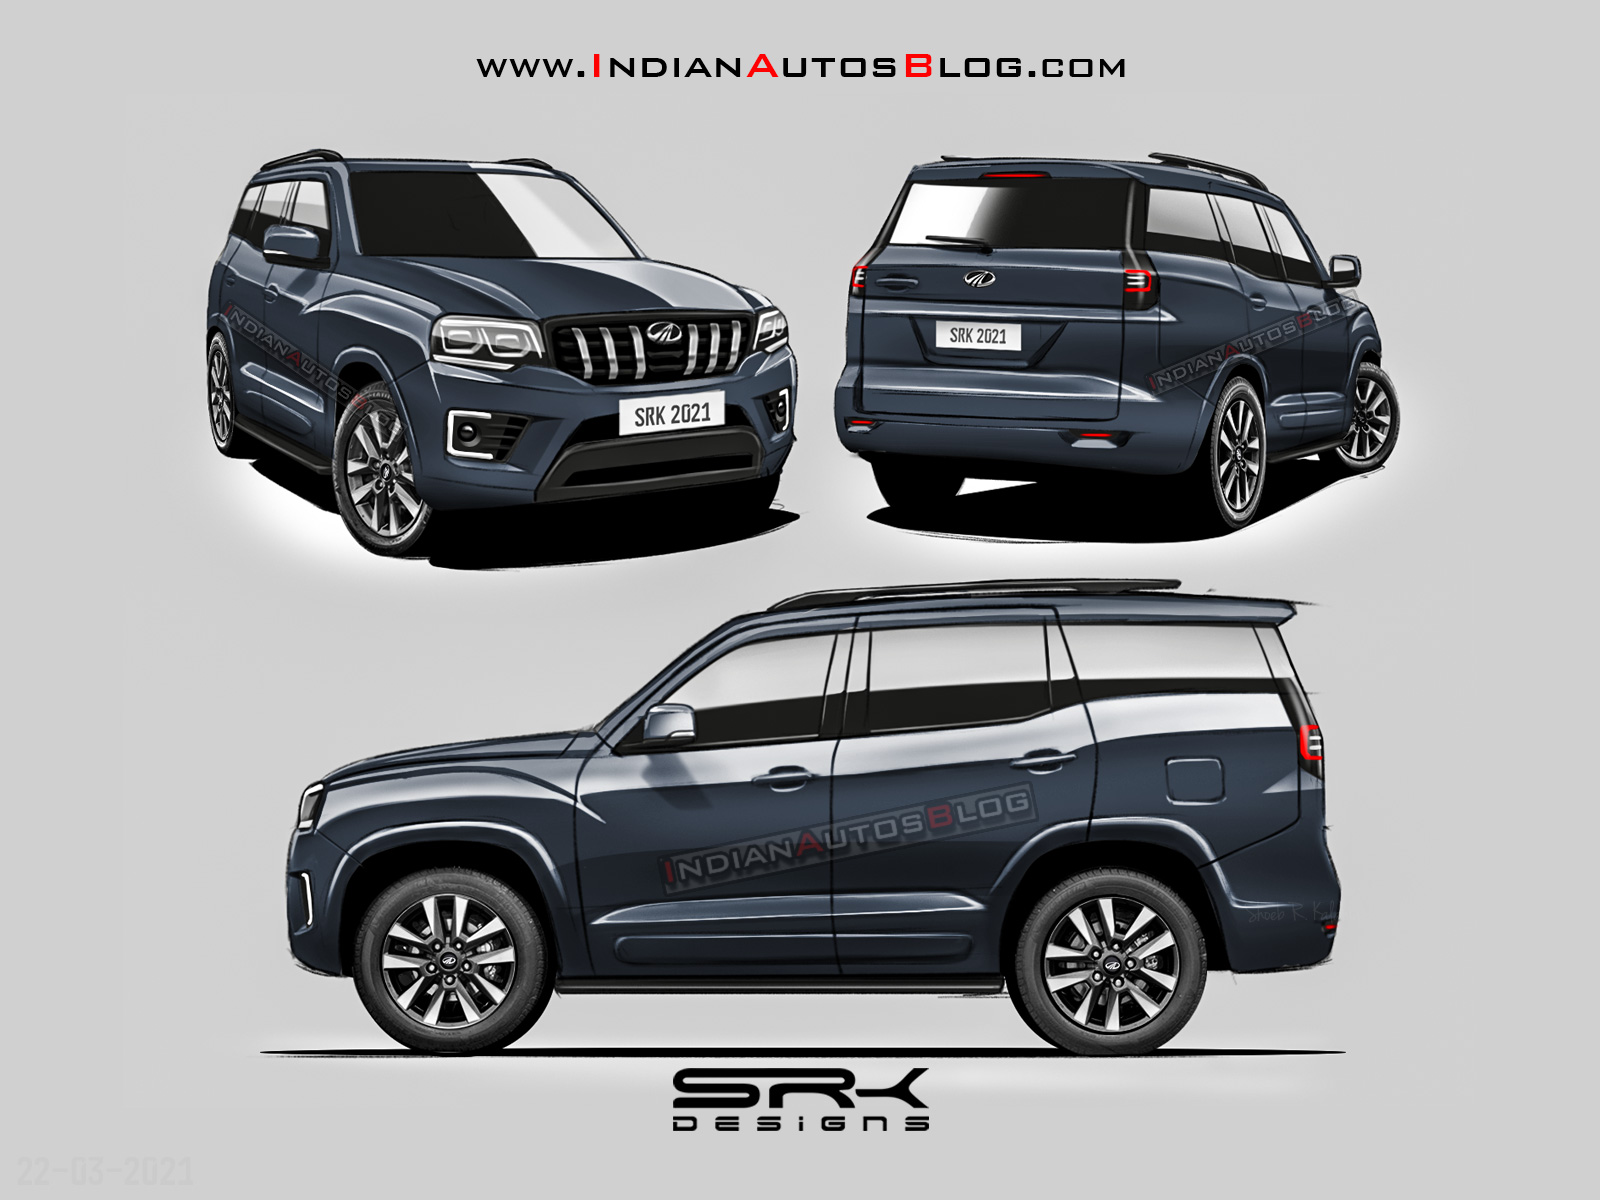 2020 Mahindra Scorpio Interiors Spied For First Time Ahead Of 2020 Debut -  ZigWheels